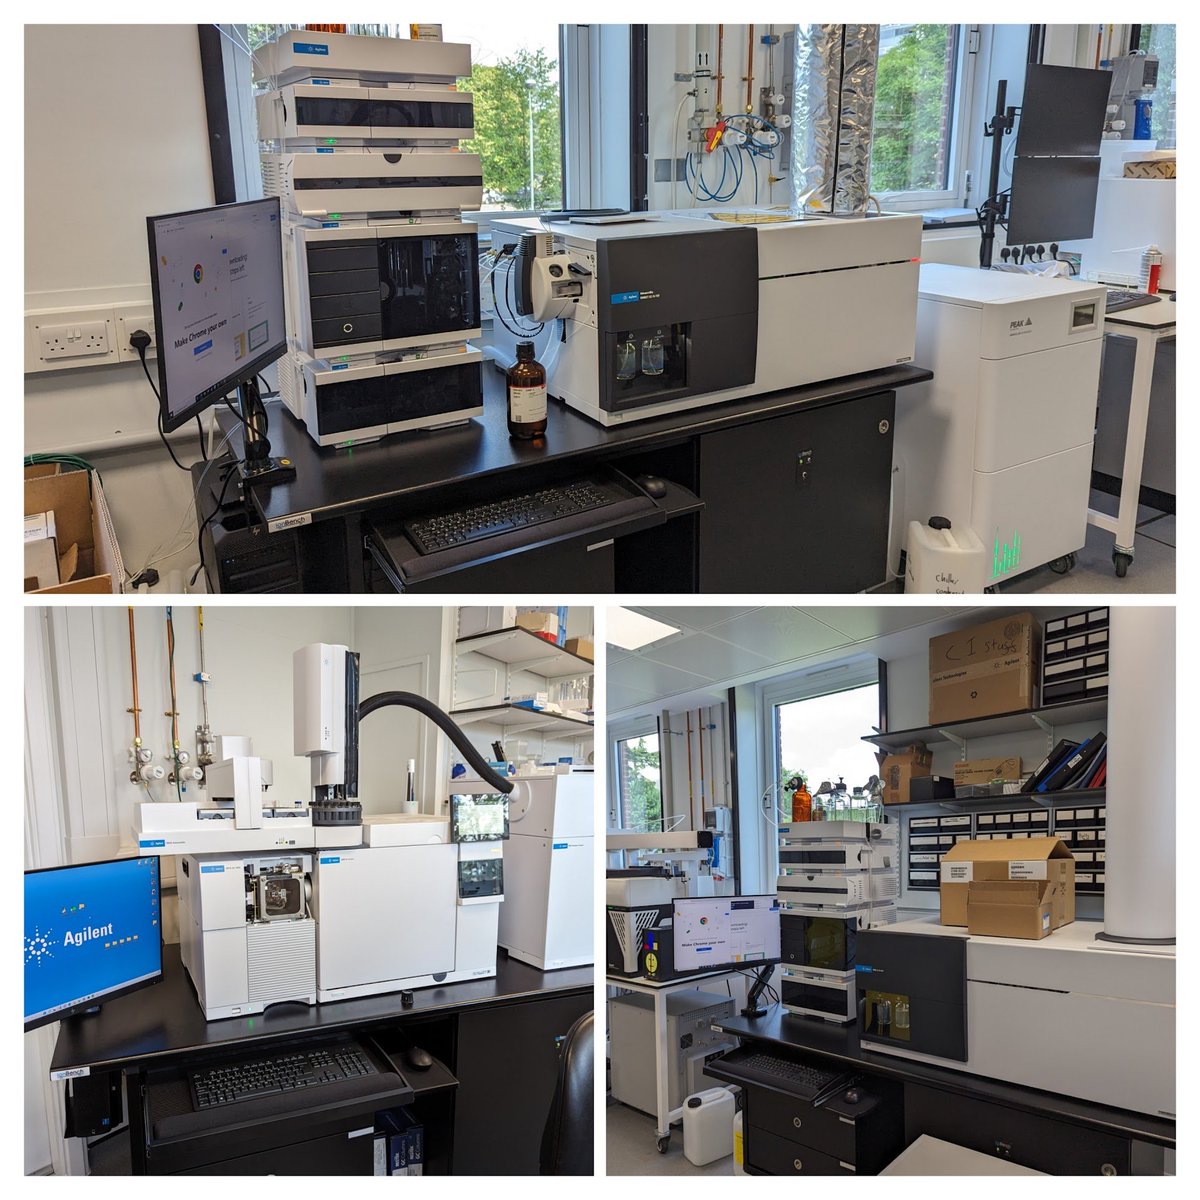 Welcoming our new MS equipment - @Agilent LC-MS QTOF with ExD and GC-MS with headspace (and a transparent ion source - so we can watch ions being formed).